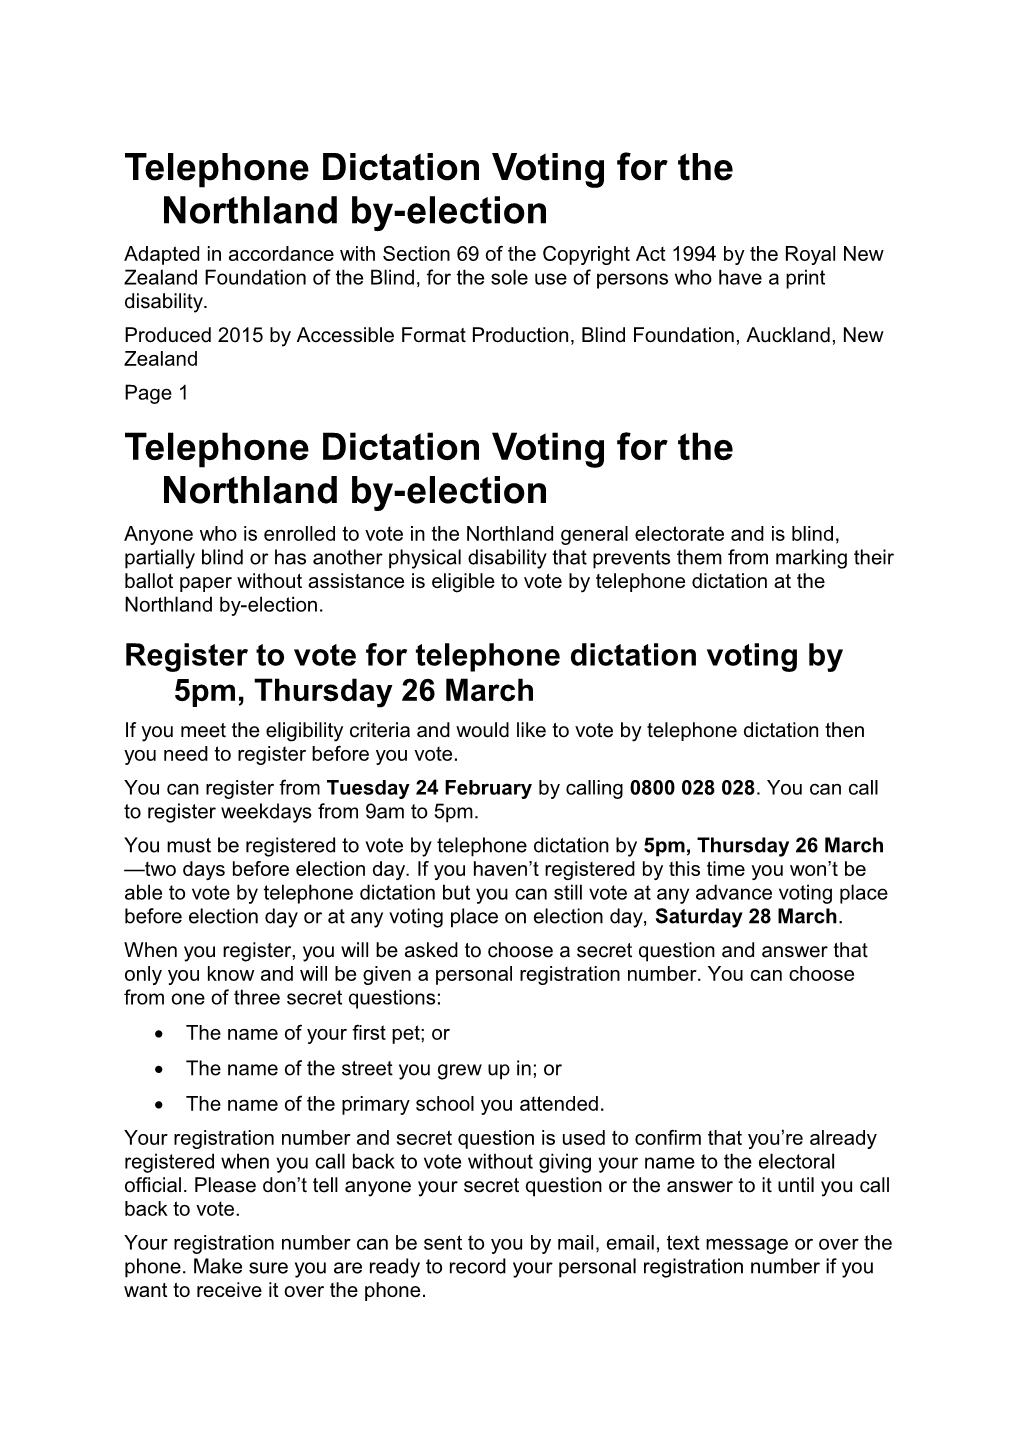 Telephone Dictation Voting for the Northland By-Election